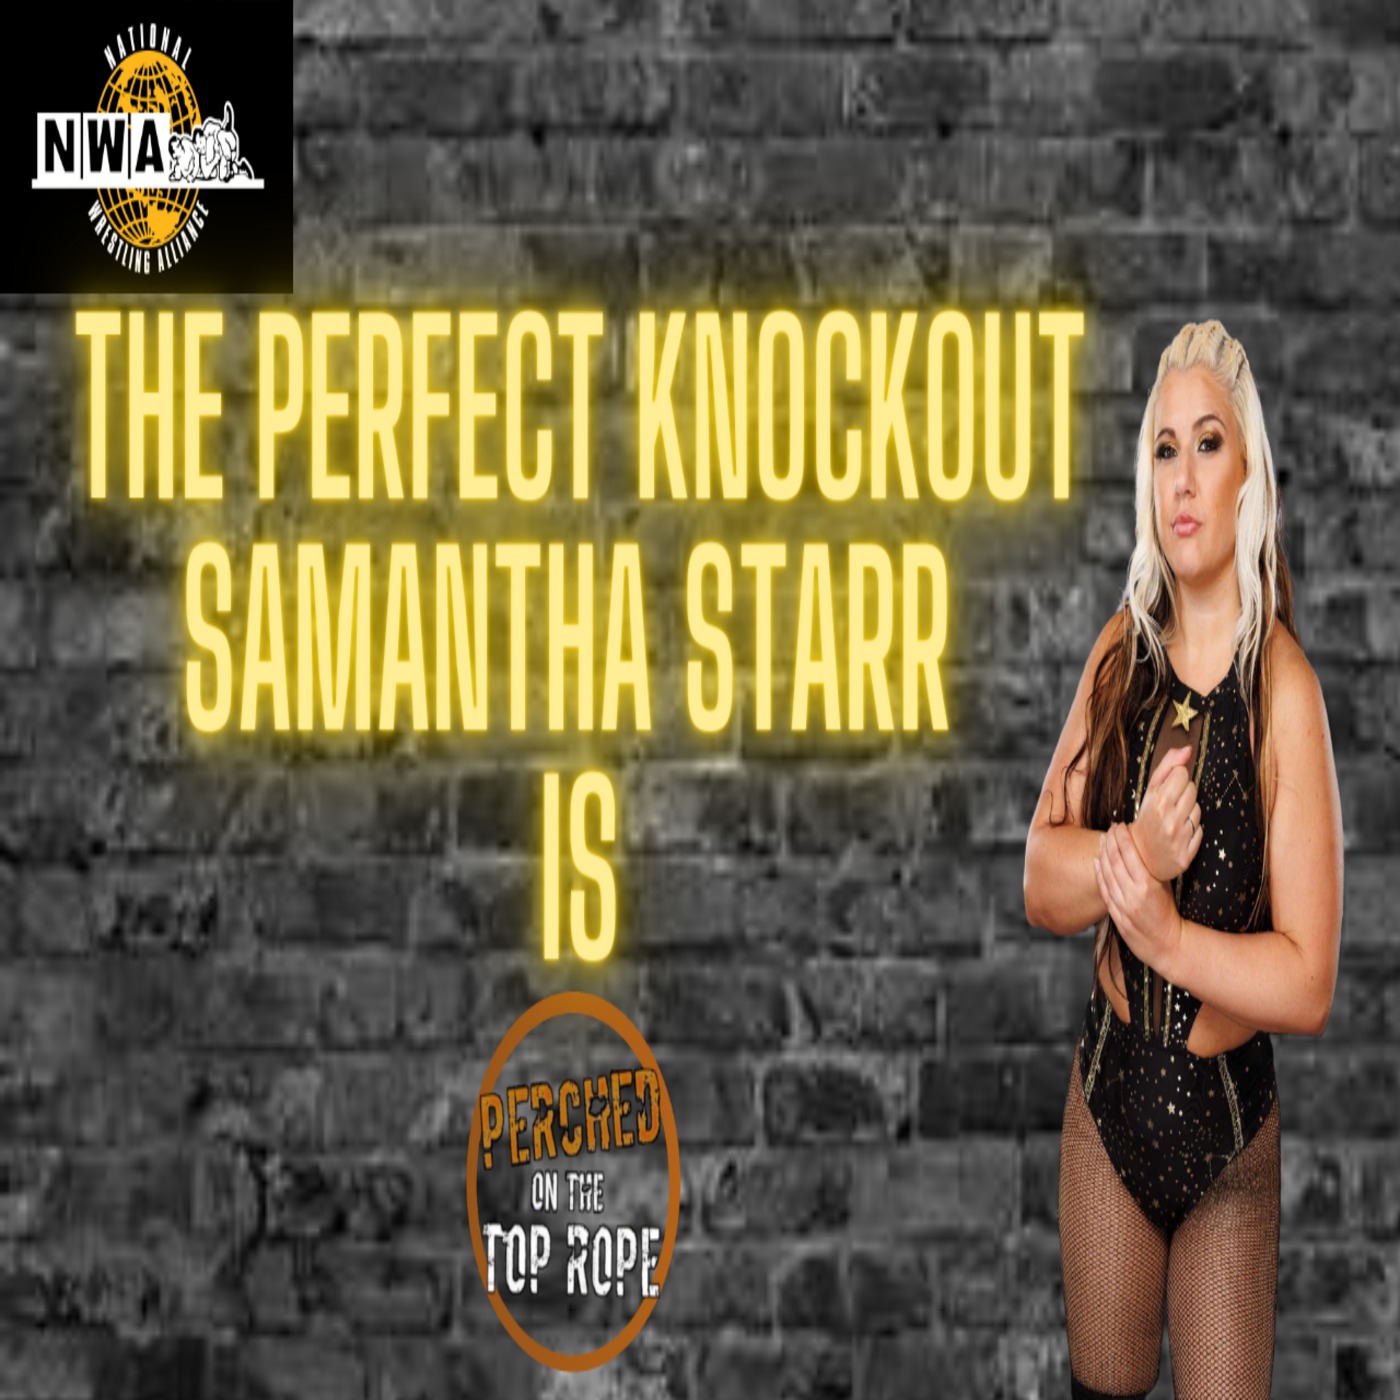 Interview With NWA's The Perfect Knockout, Samantha Starr